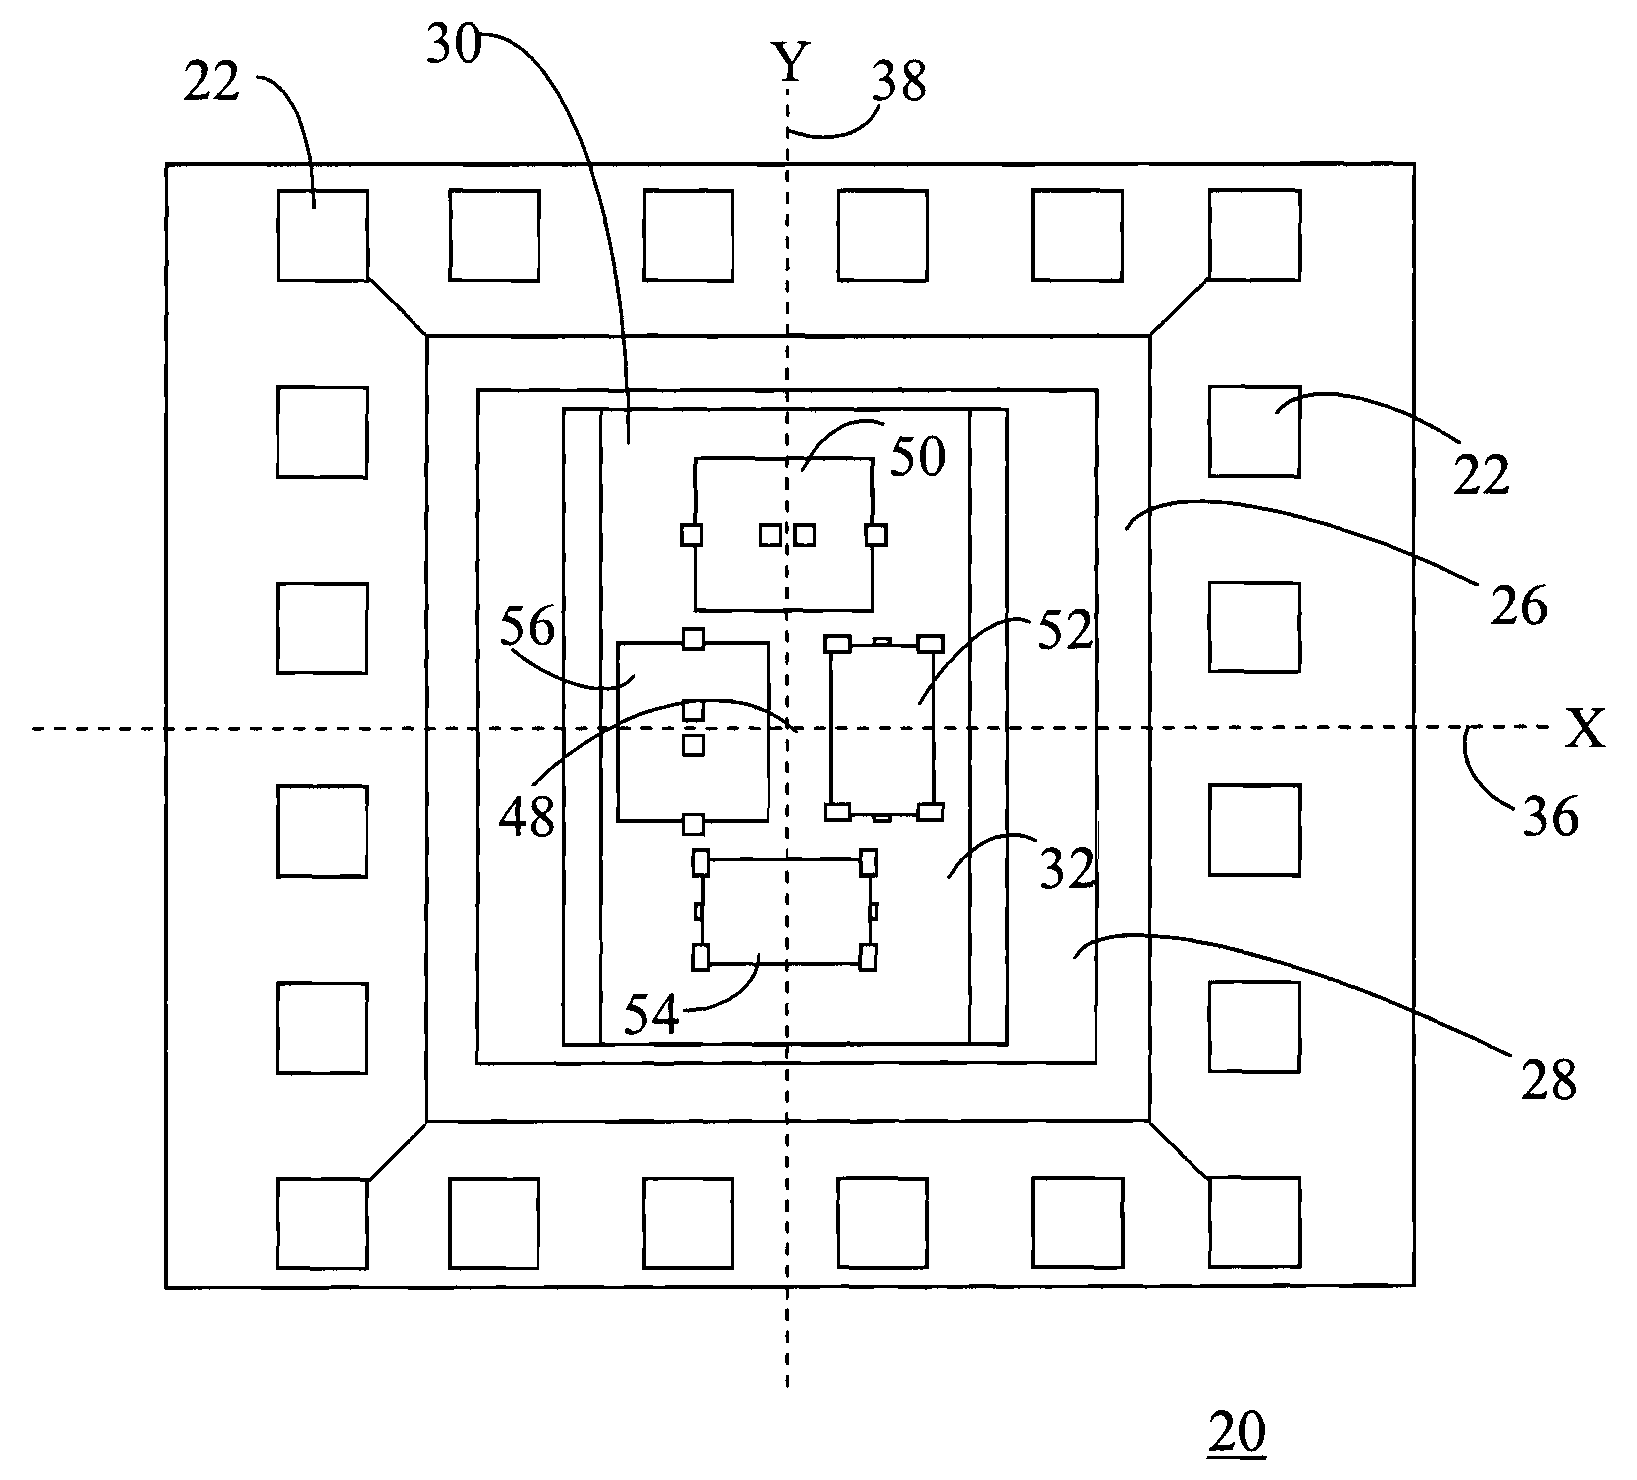 Multiple axis transducer with multiple sensing range capability